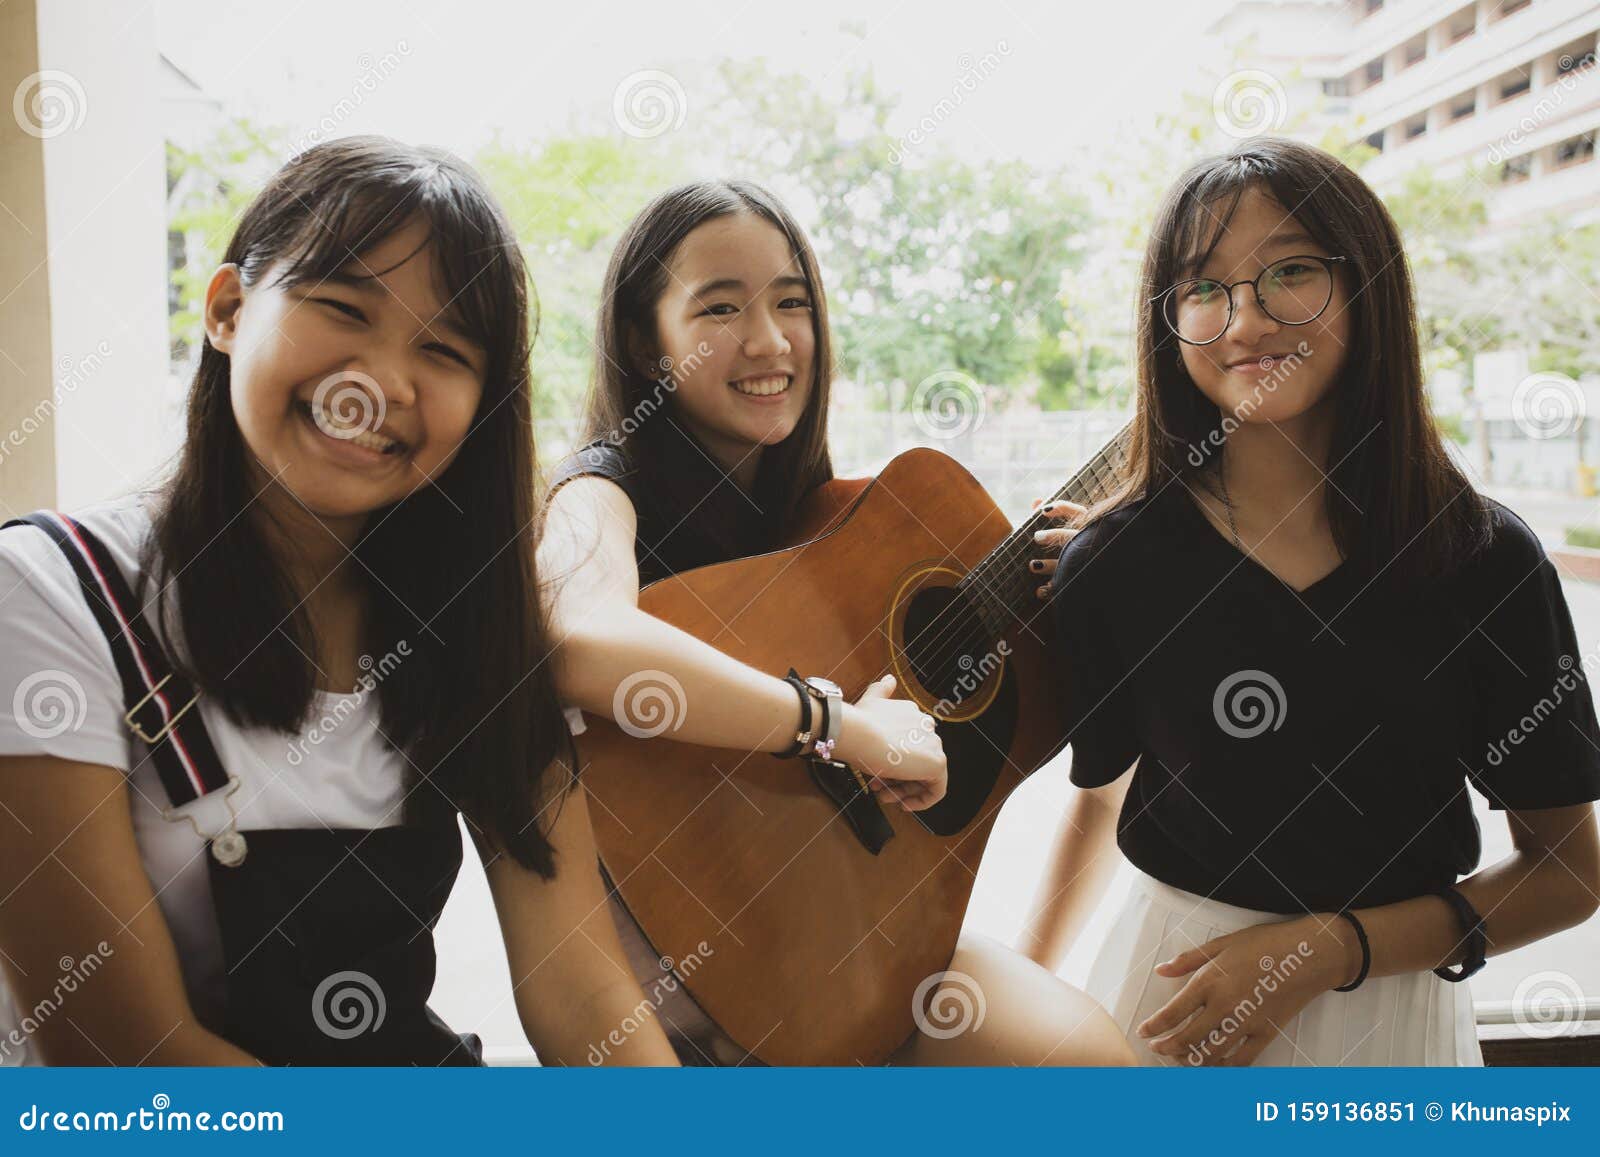 group of asian teenager standing outdoor plying spanish guitar